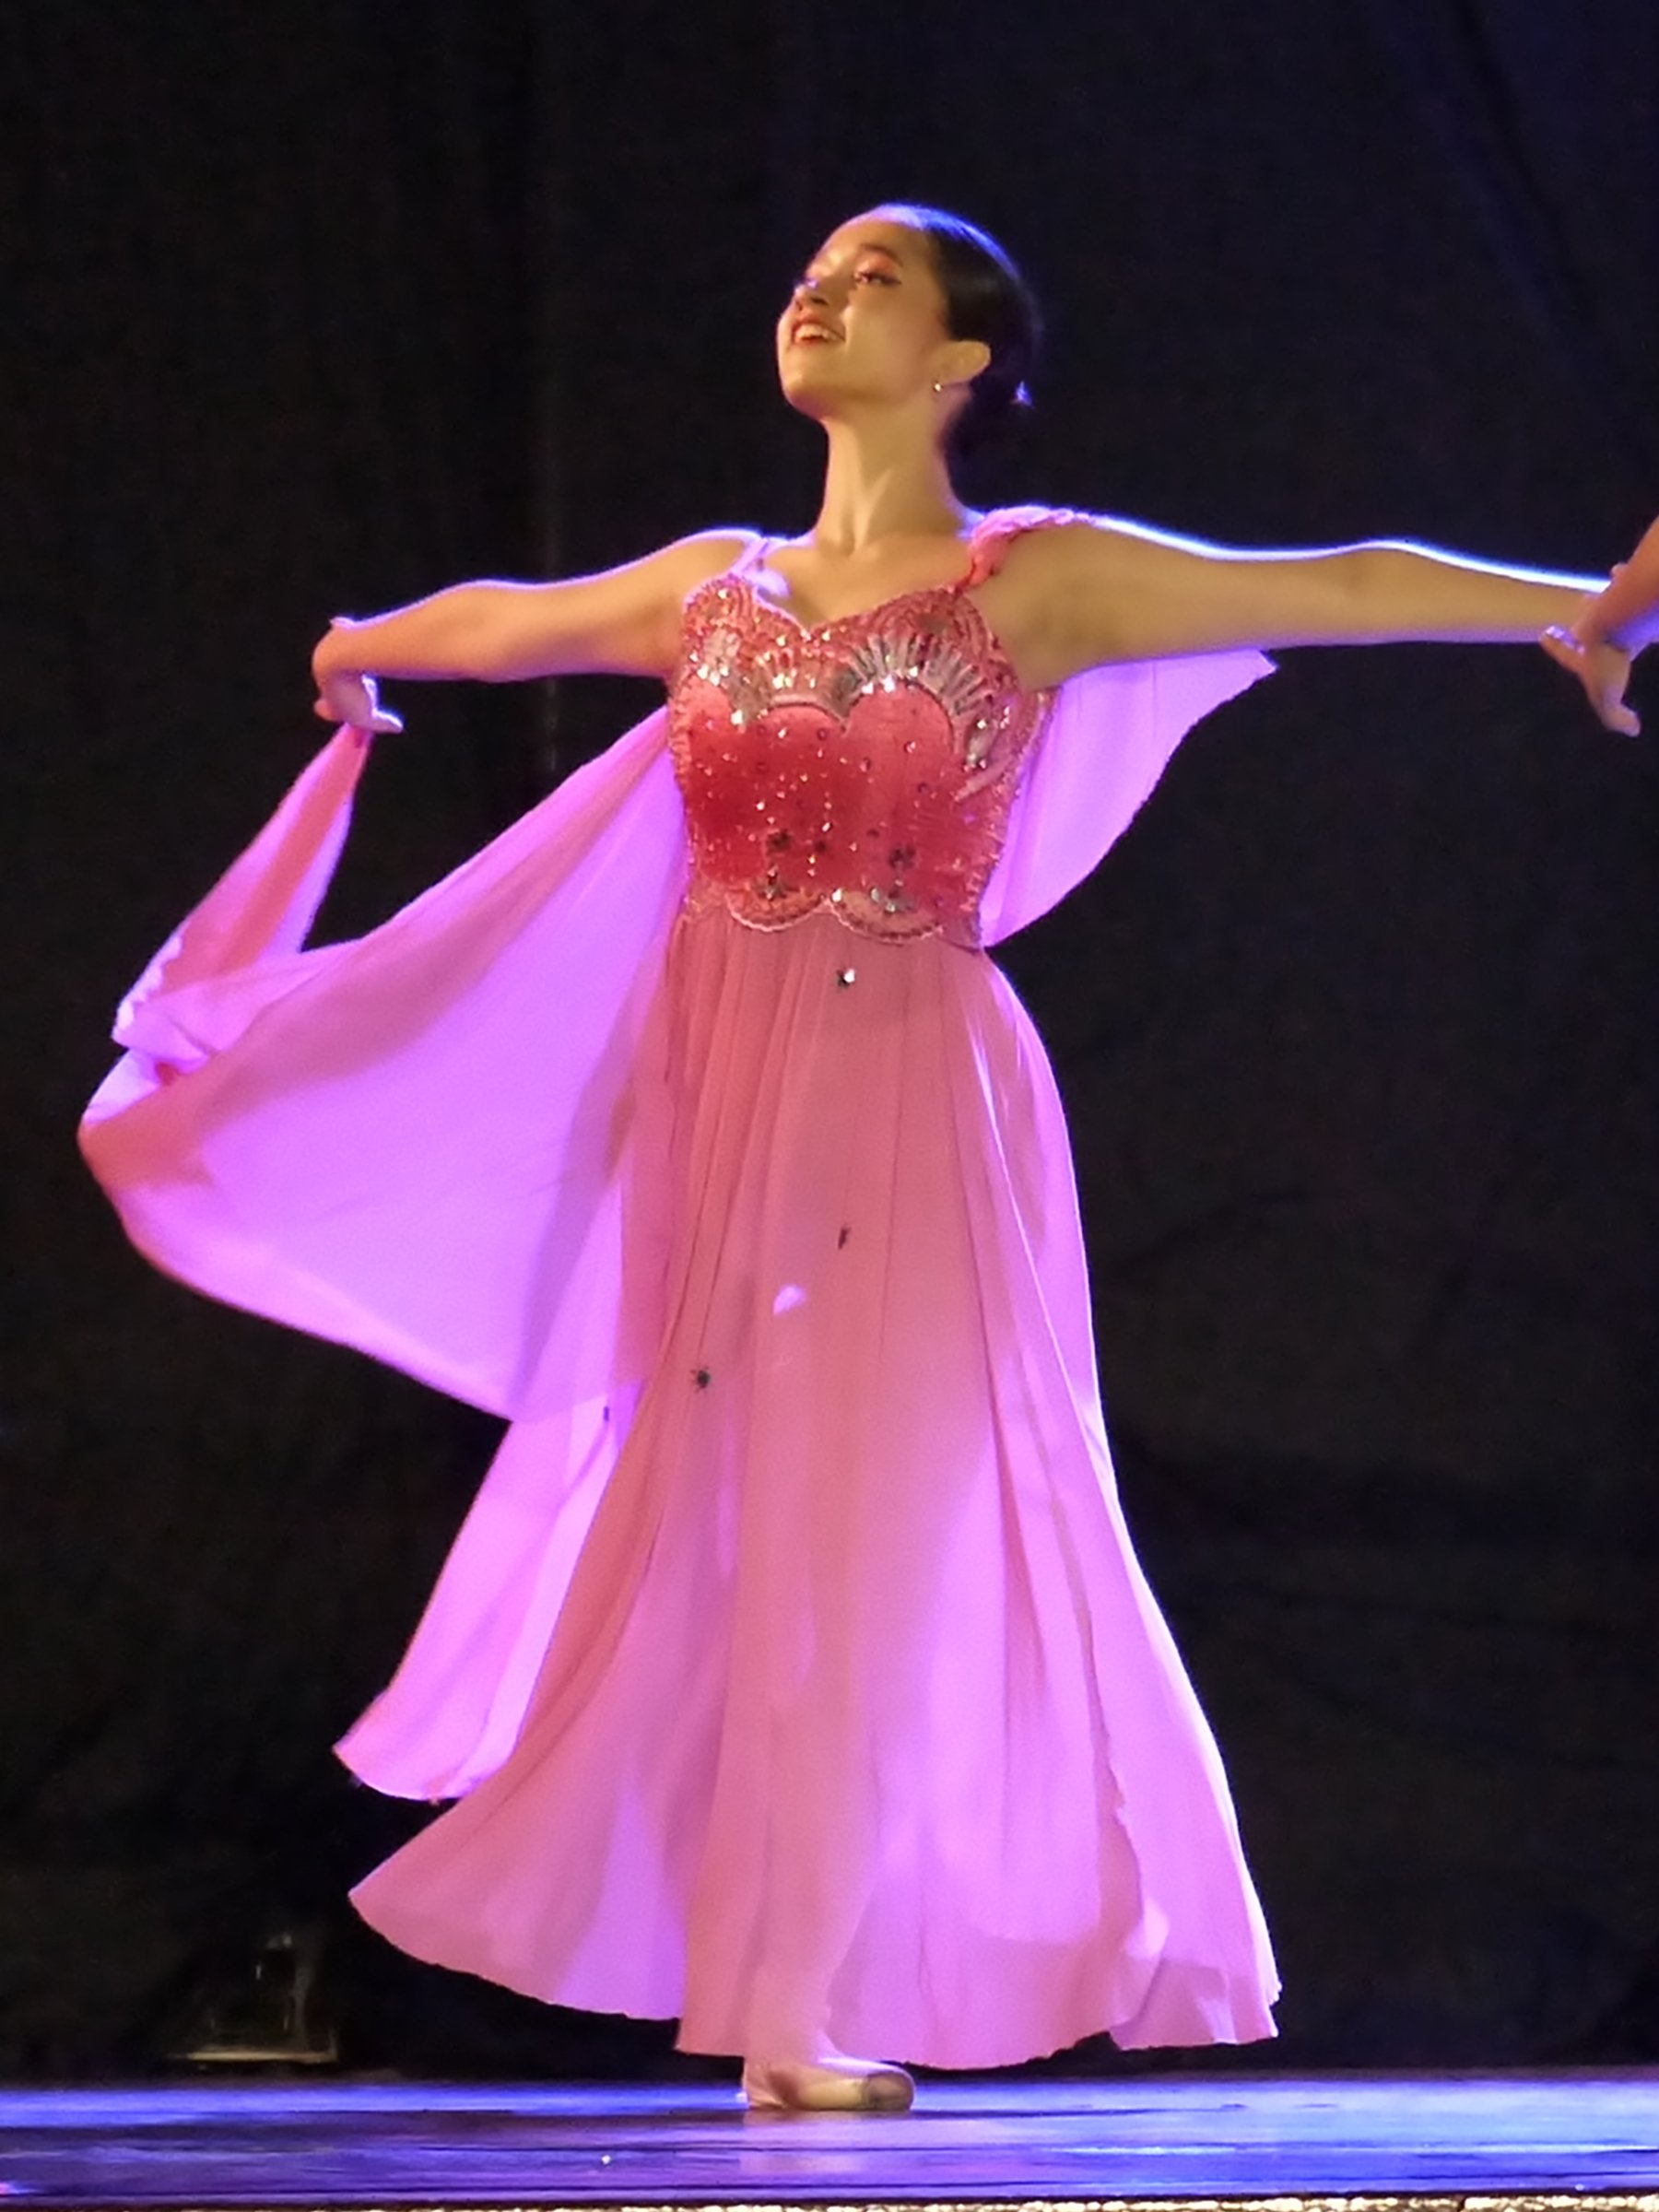    Judith Po is the picture of pink perfection as she joins the all-female  Dalagang Pilipina,  a choreography by the late Tony Fabella that celebrates ballet and fashion. The piece was presented in an  OPM Suite  for Ballet Manila’s  The Silver Gala